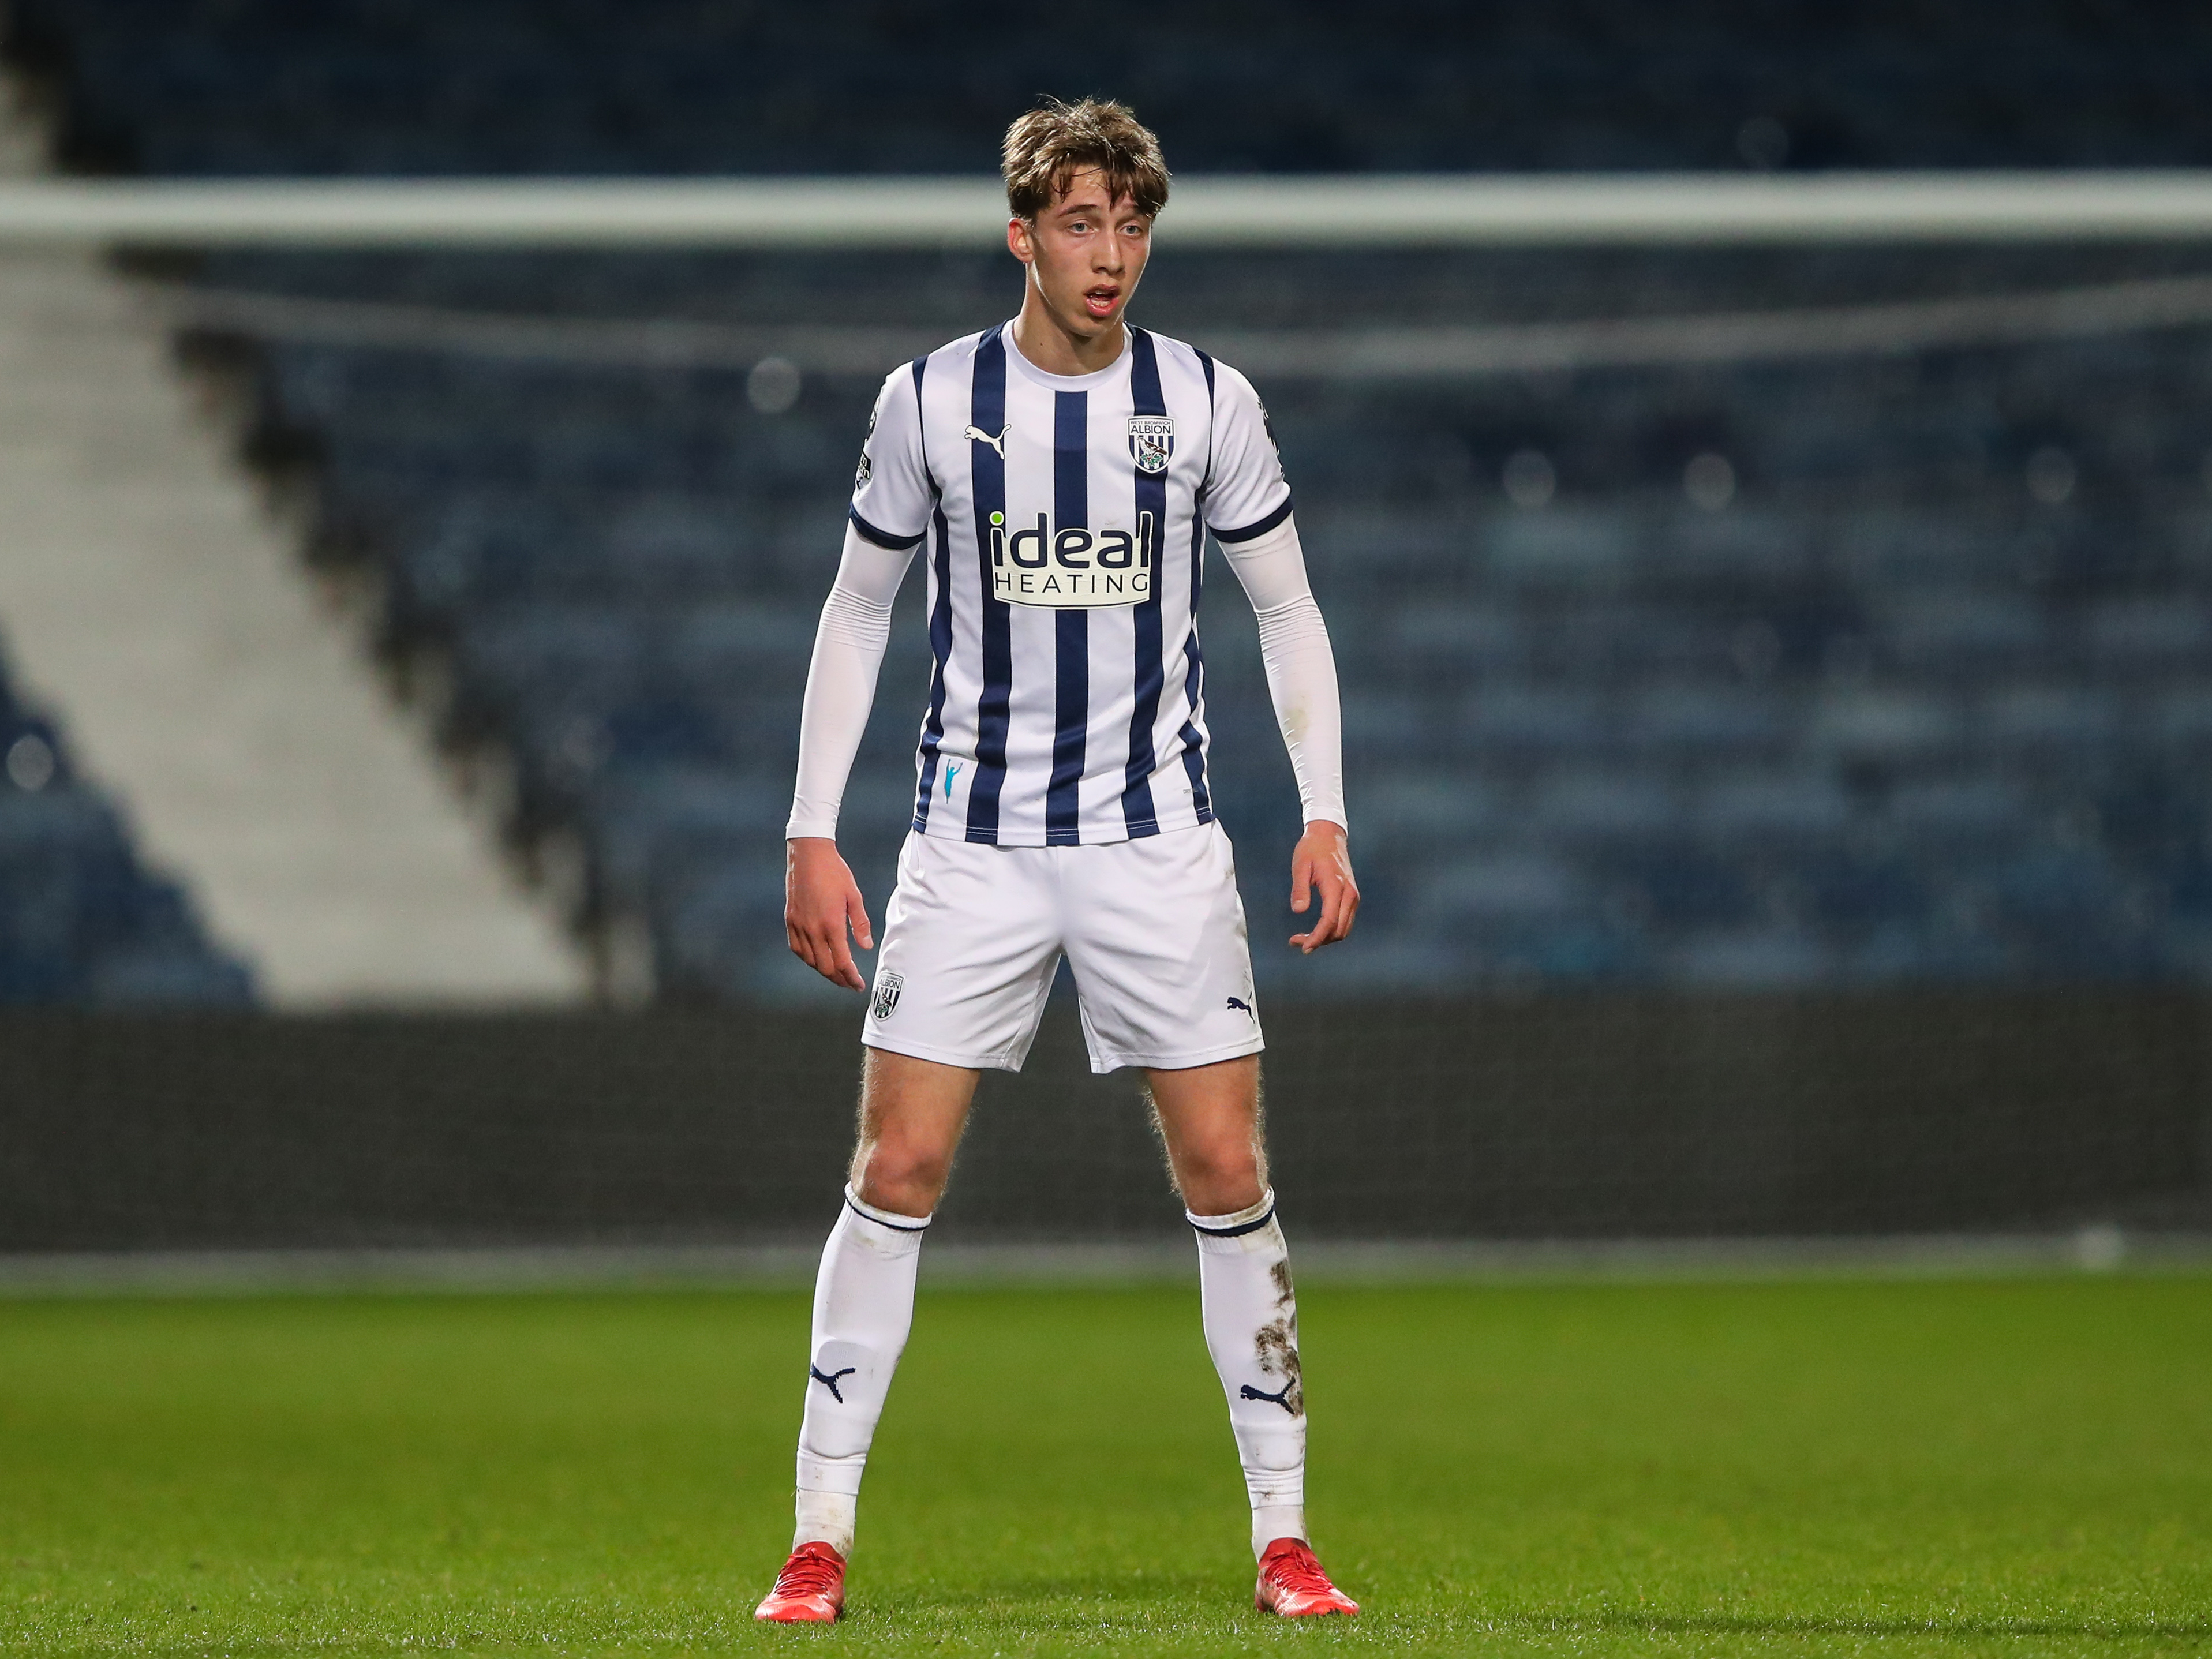 A photo of Harry Whitwell, in the 23/24 home kit, in action for Albion's PL2 team at The Hawthorns